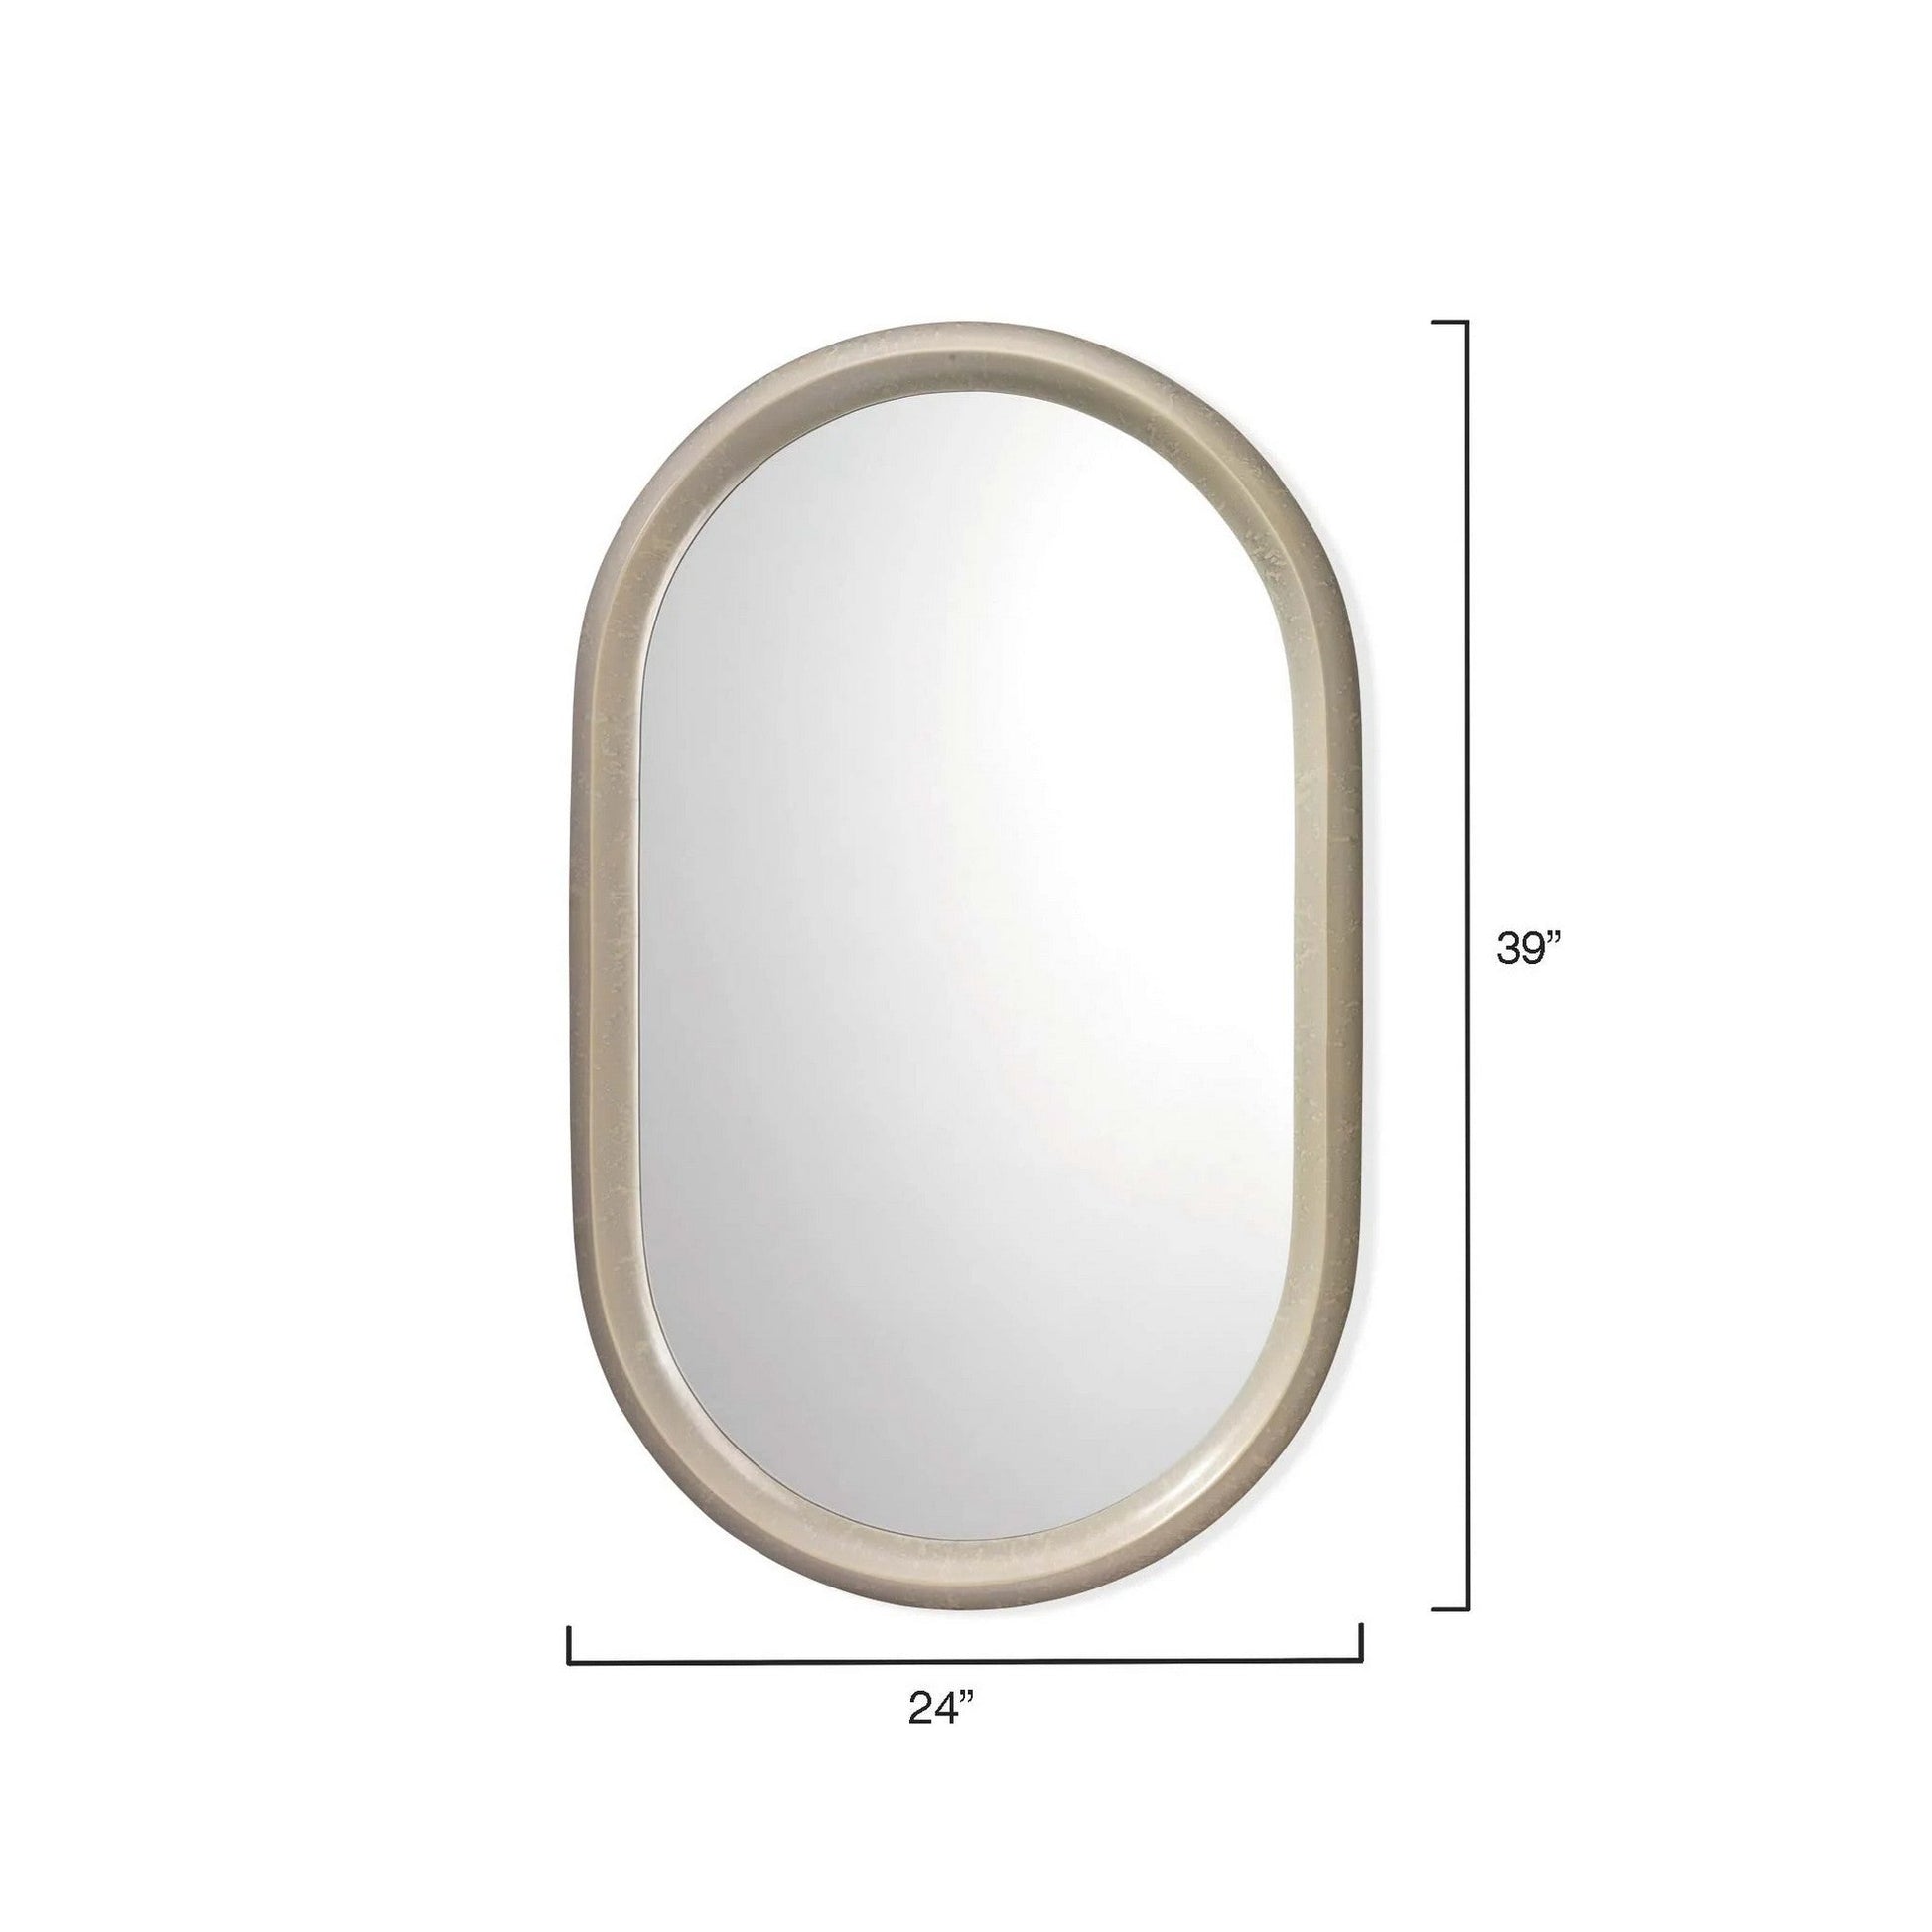 Jamie Young Altitude 24" x 39" Oval Mirror With Dove Gray Frame